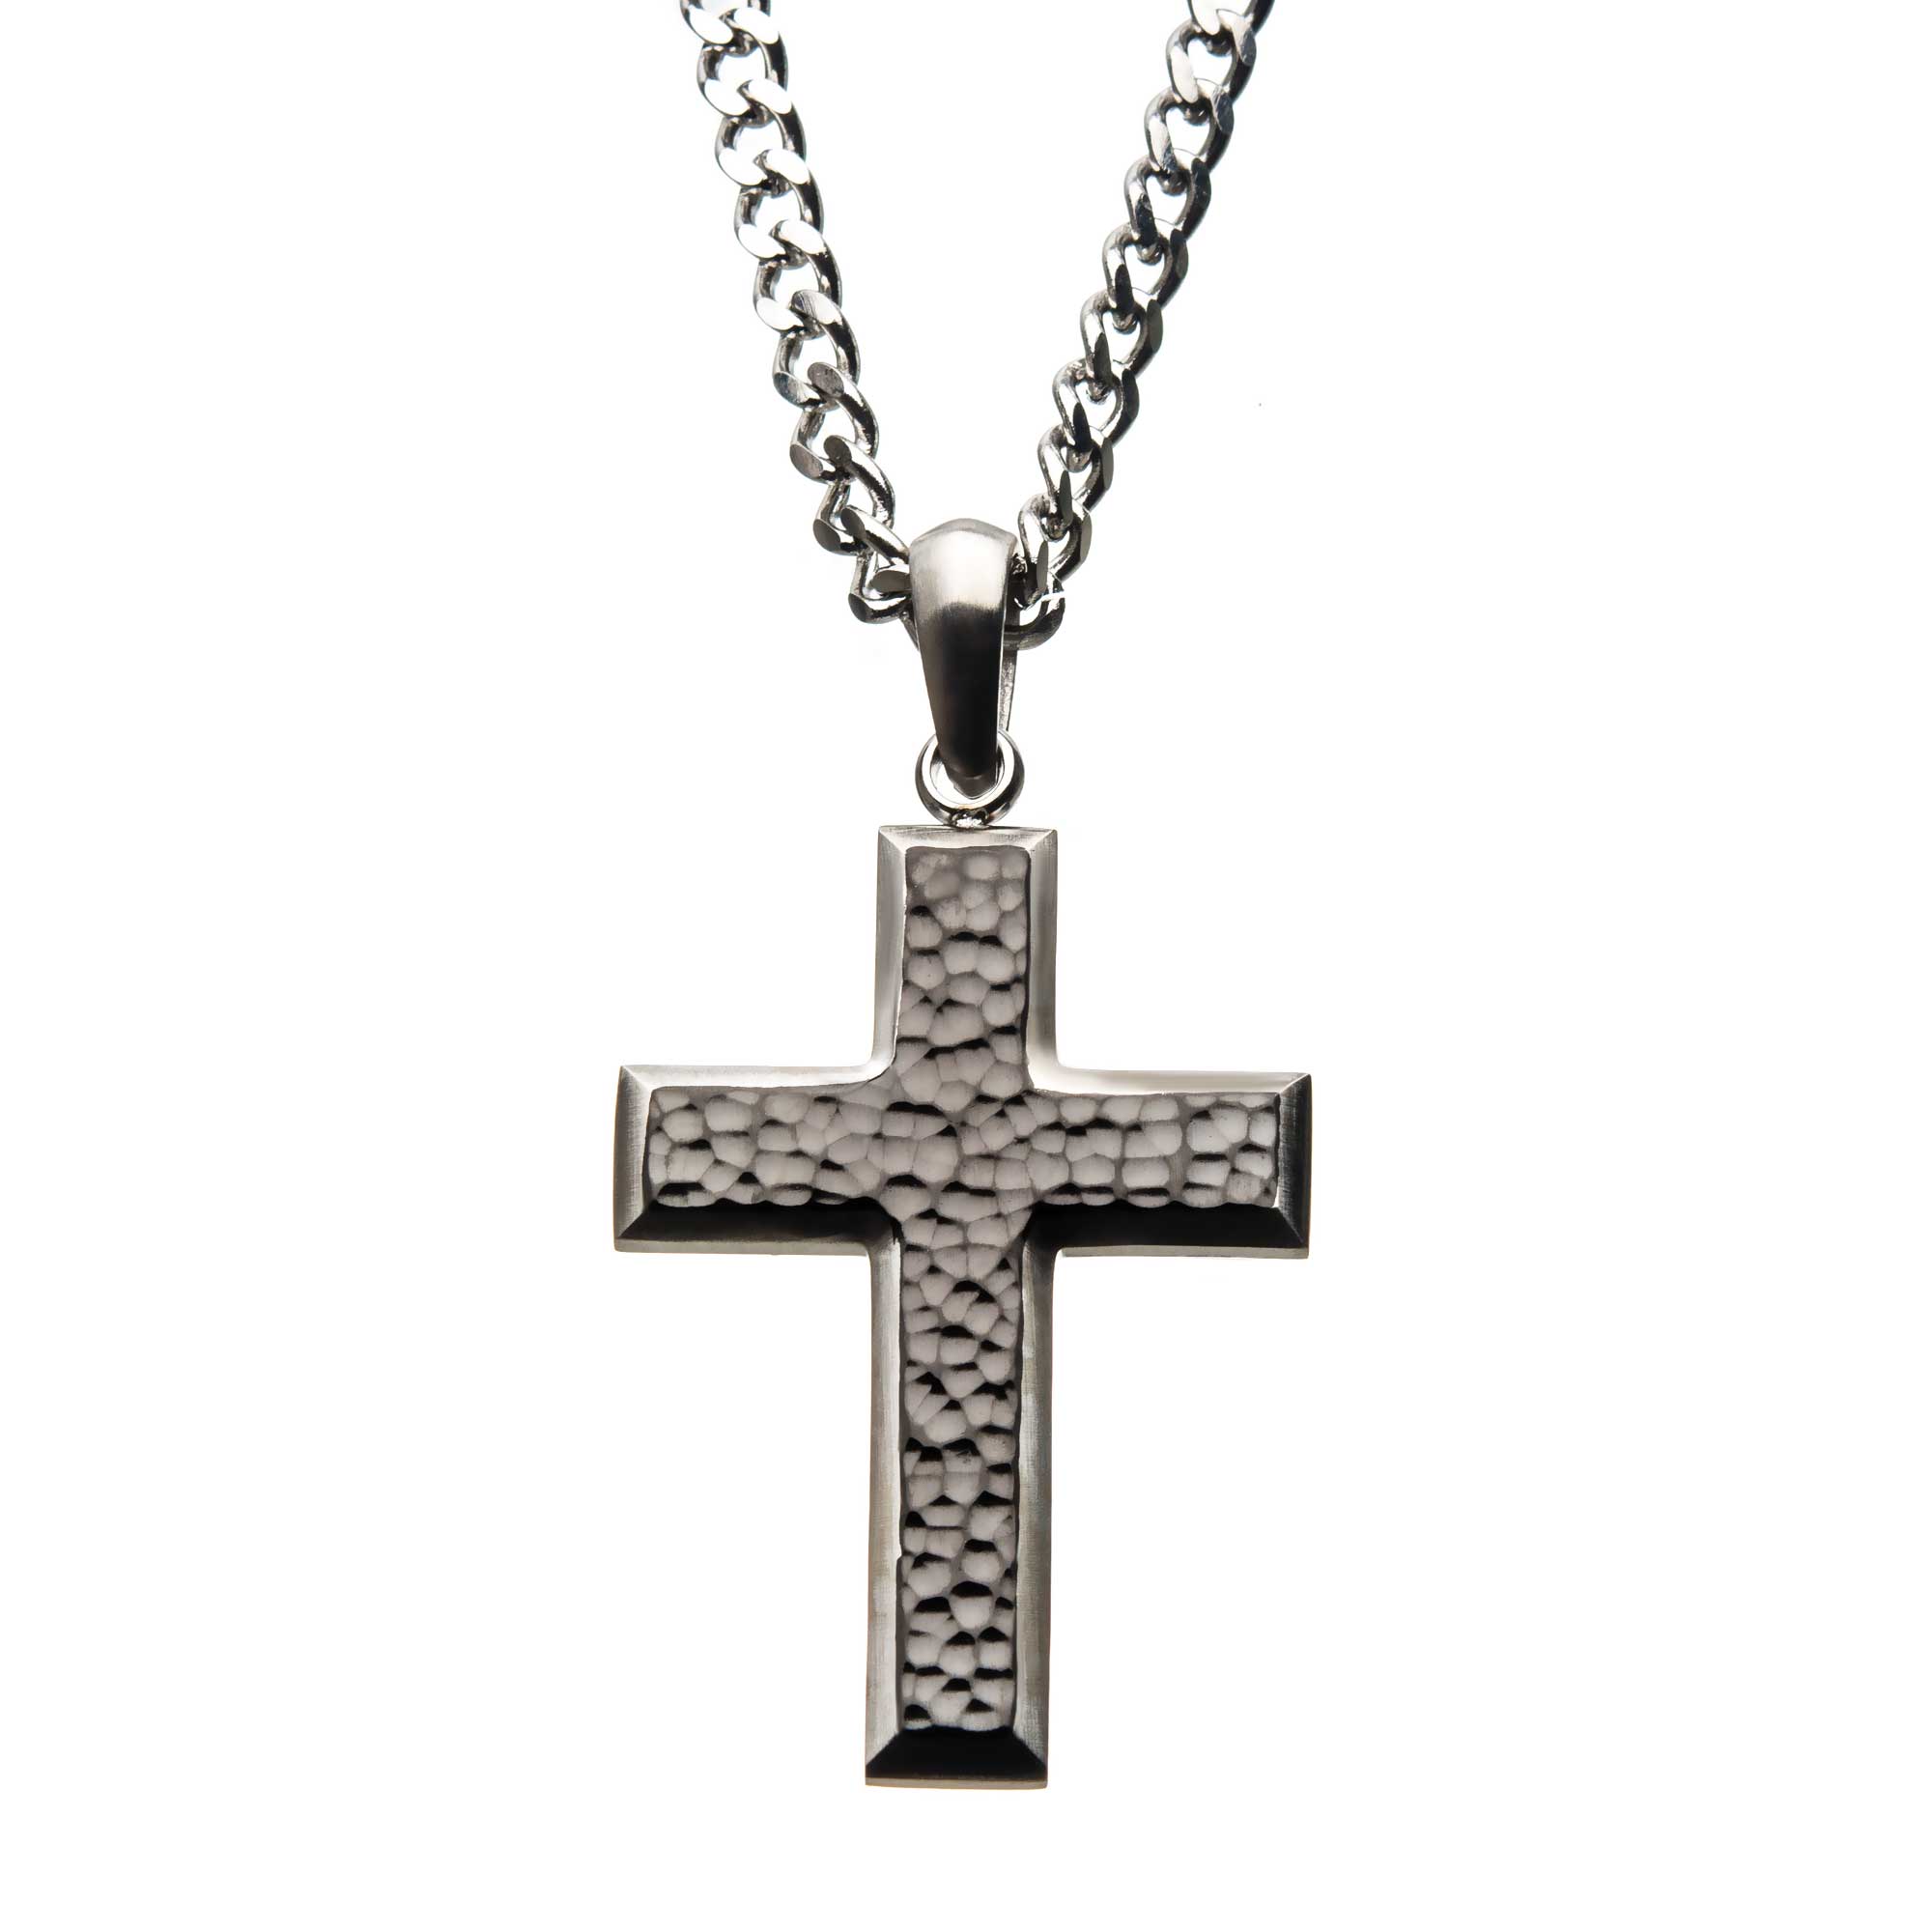 Stainless Steel Hammered Cross Pendant with Chain P.K. Bennett Jewelers Mundelein, IL